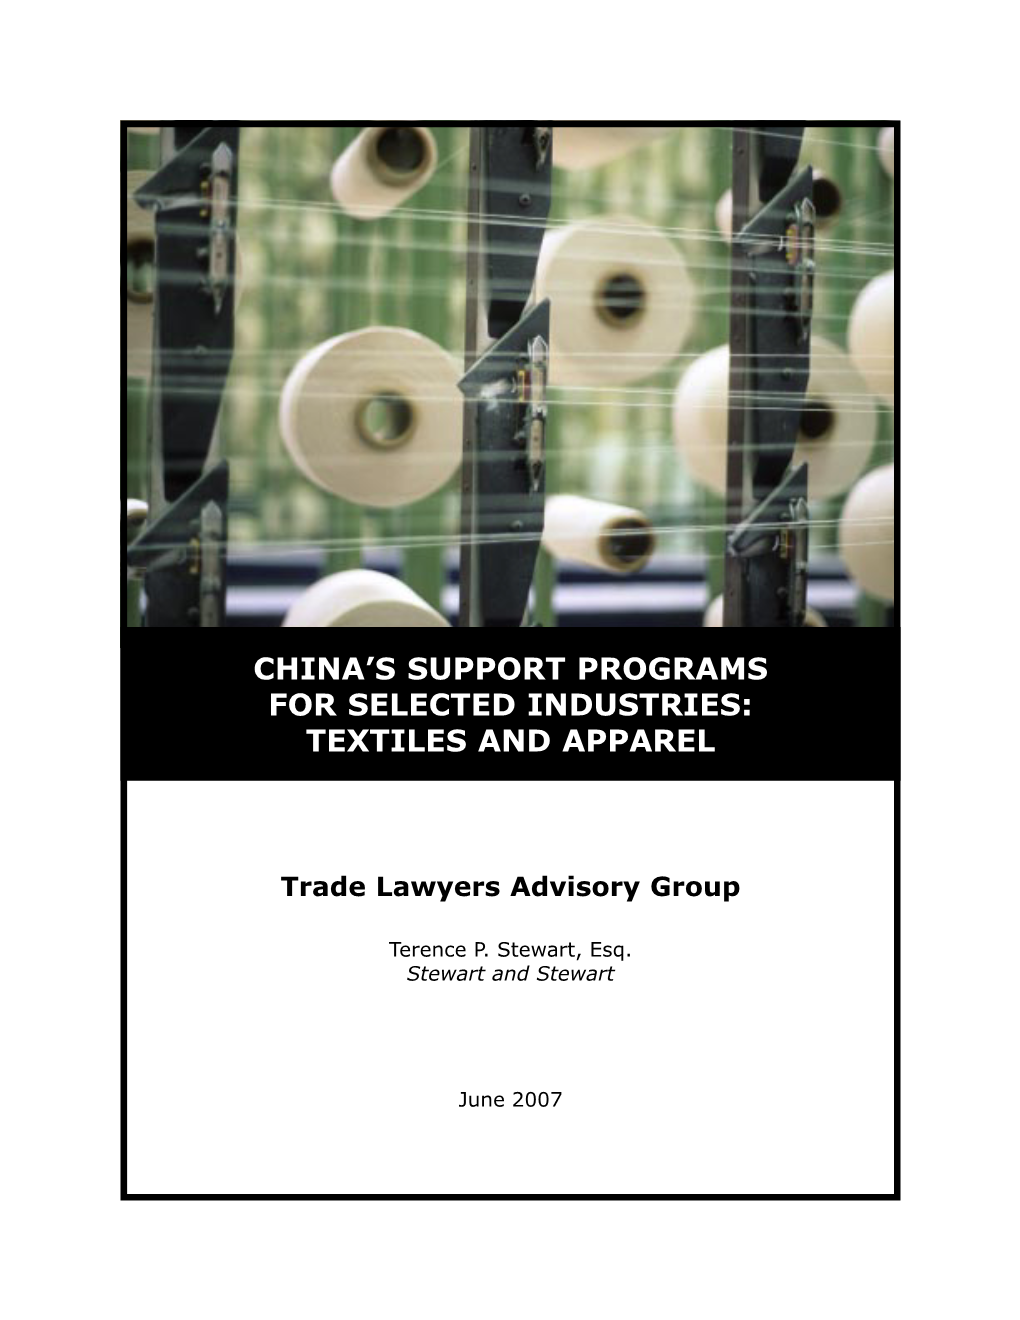 China's Support Programs for Selected Industries: Textiles and Apparel